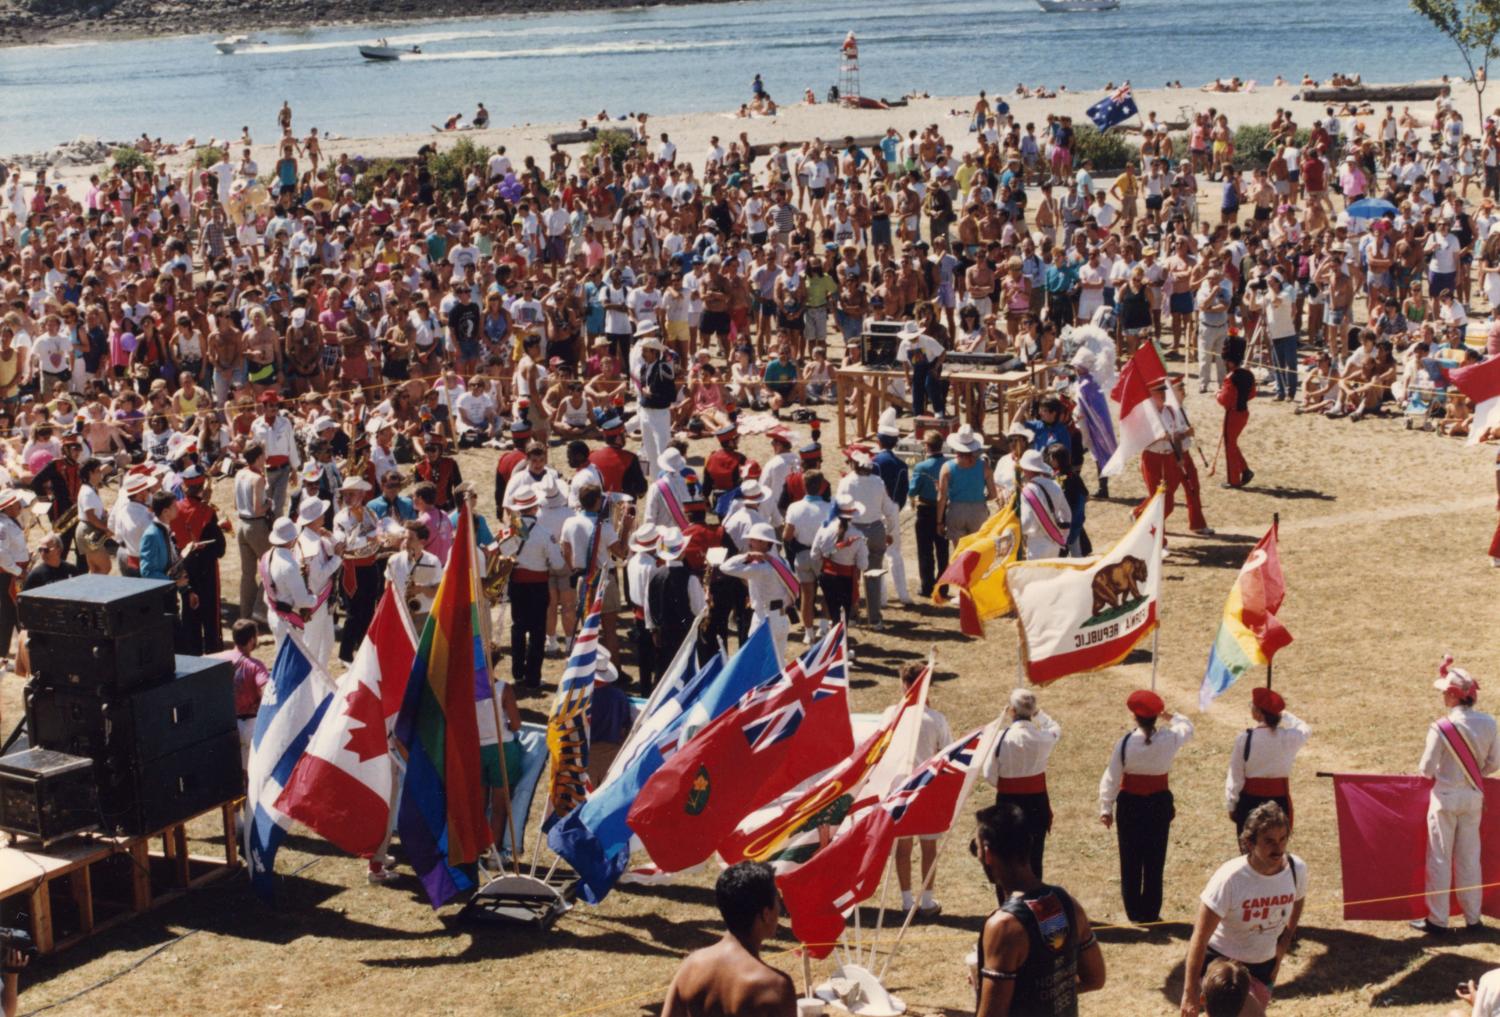 Crowd at beach with flags from different states and provinces